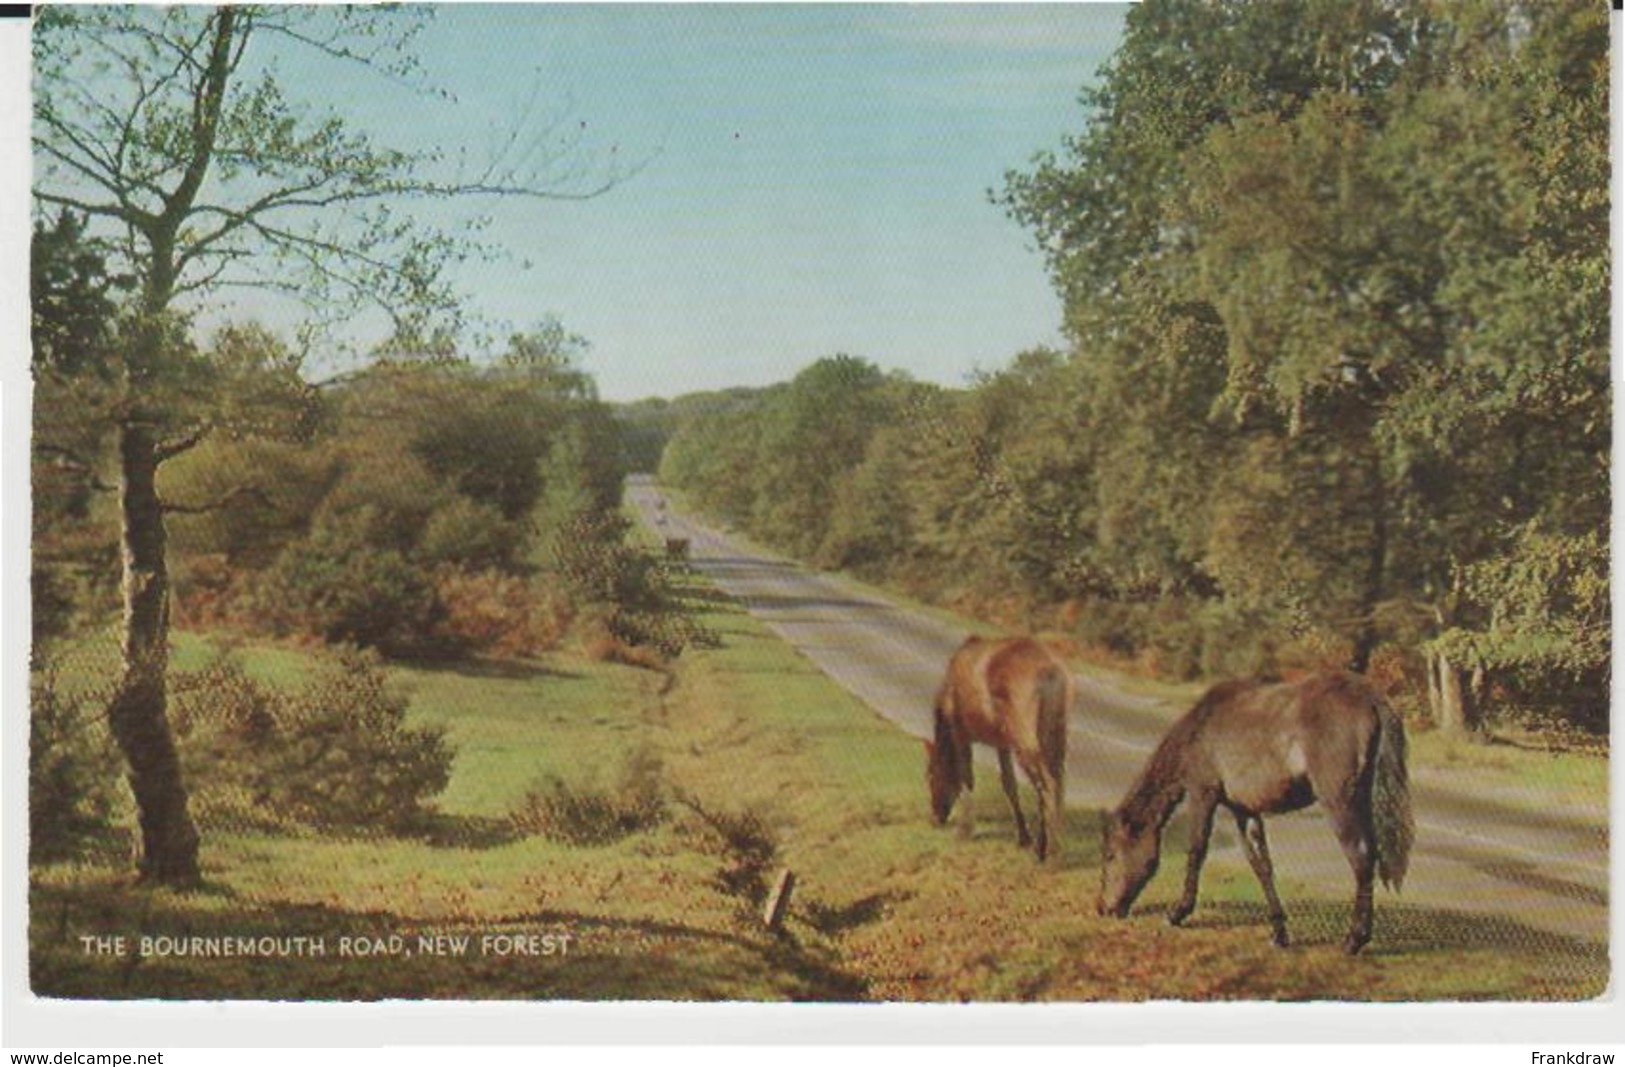 Postcard - The Bournemouth Road, New Forest - Unused - Card No. 1652c  Very Good - Unclassified